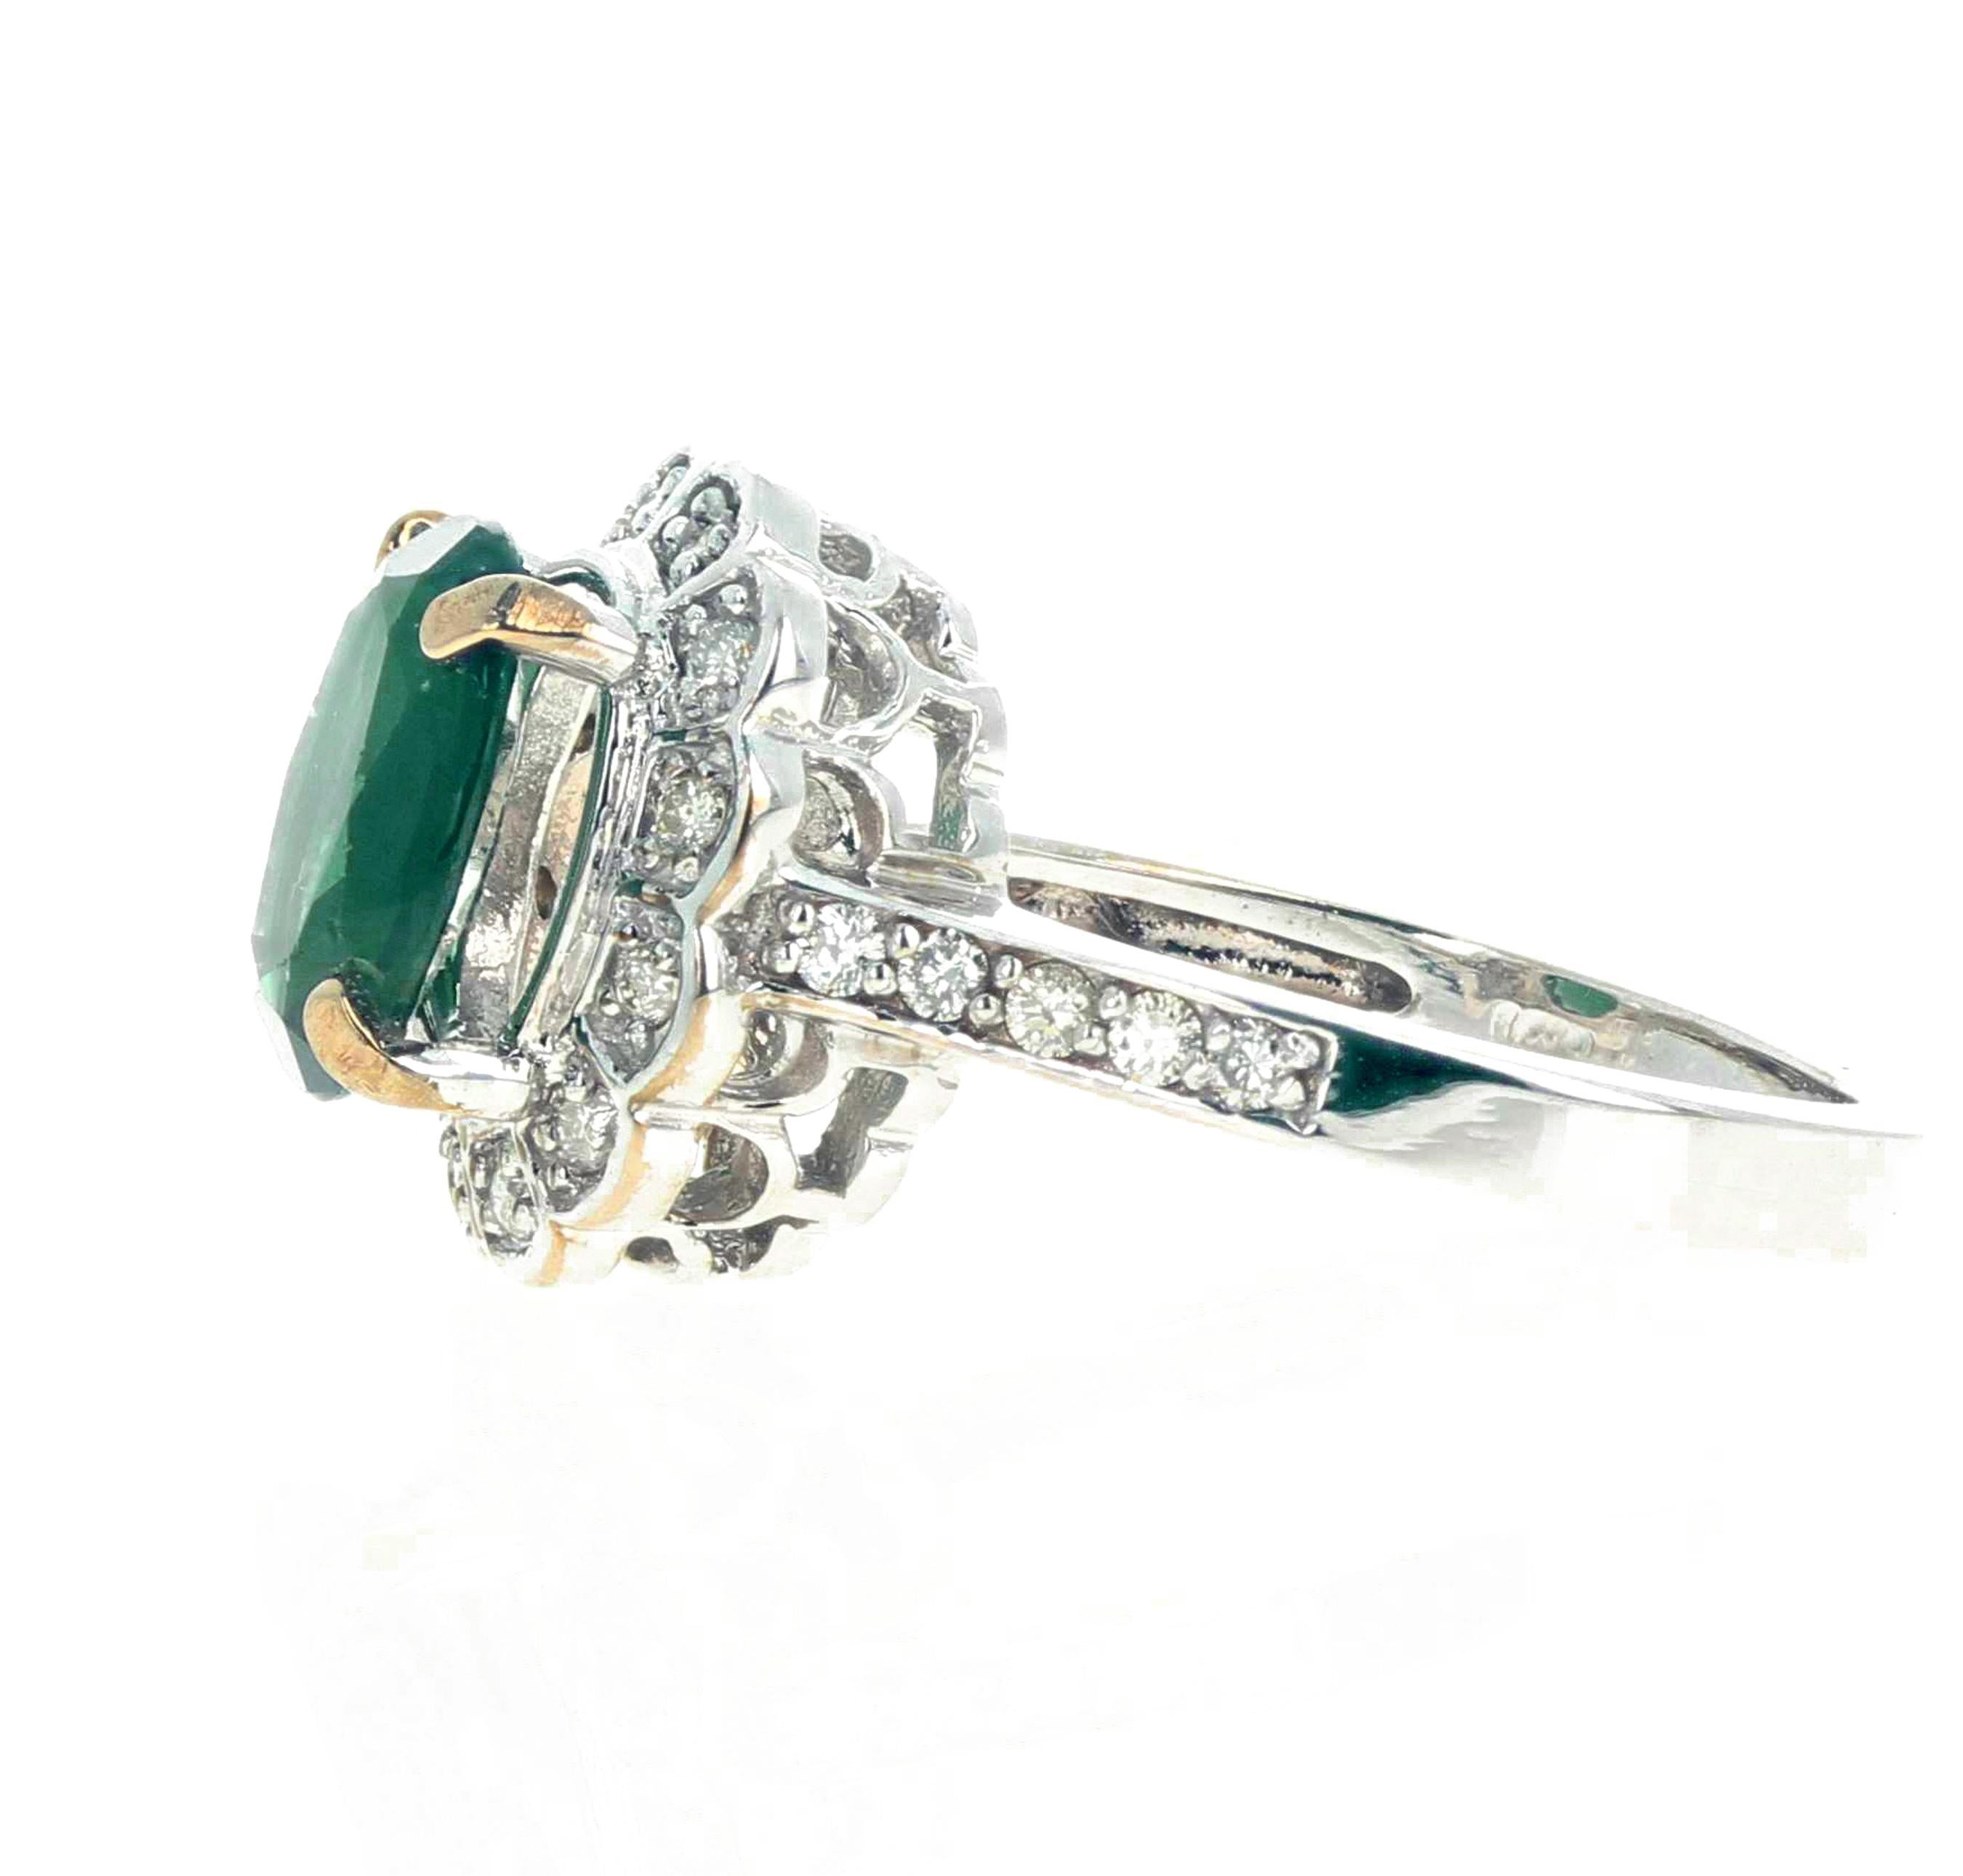 AJD Intensely Glowing 2.23 Ct Green Apatite & White Diamonds Ring For Sale 4